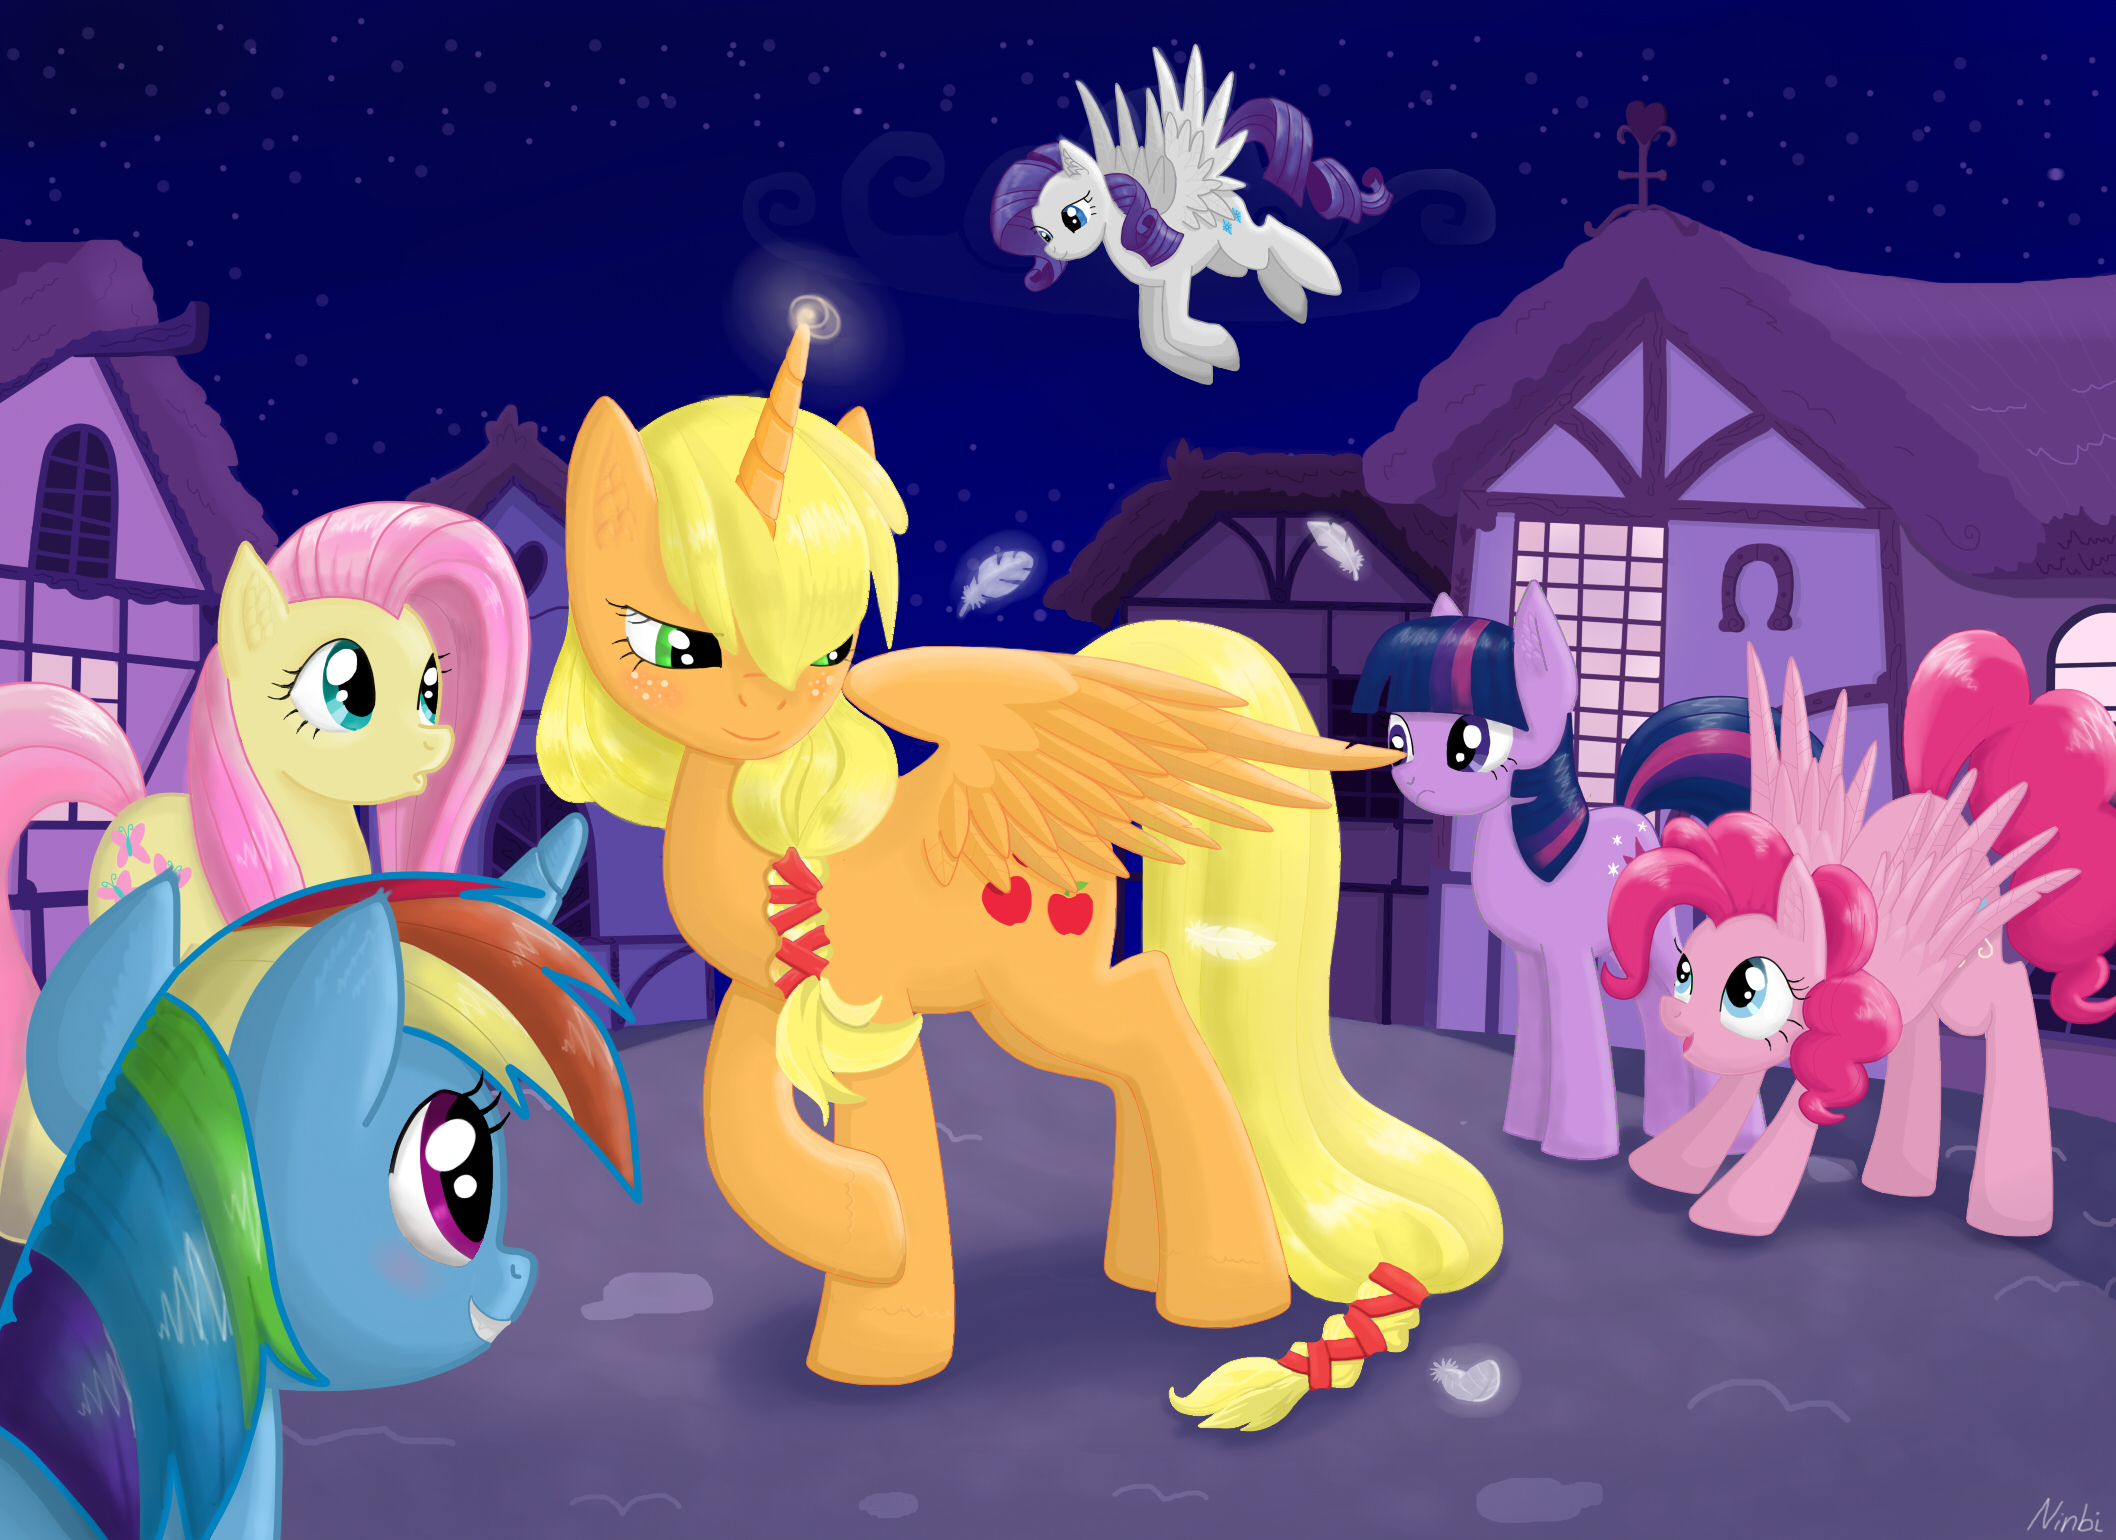 May little pony